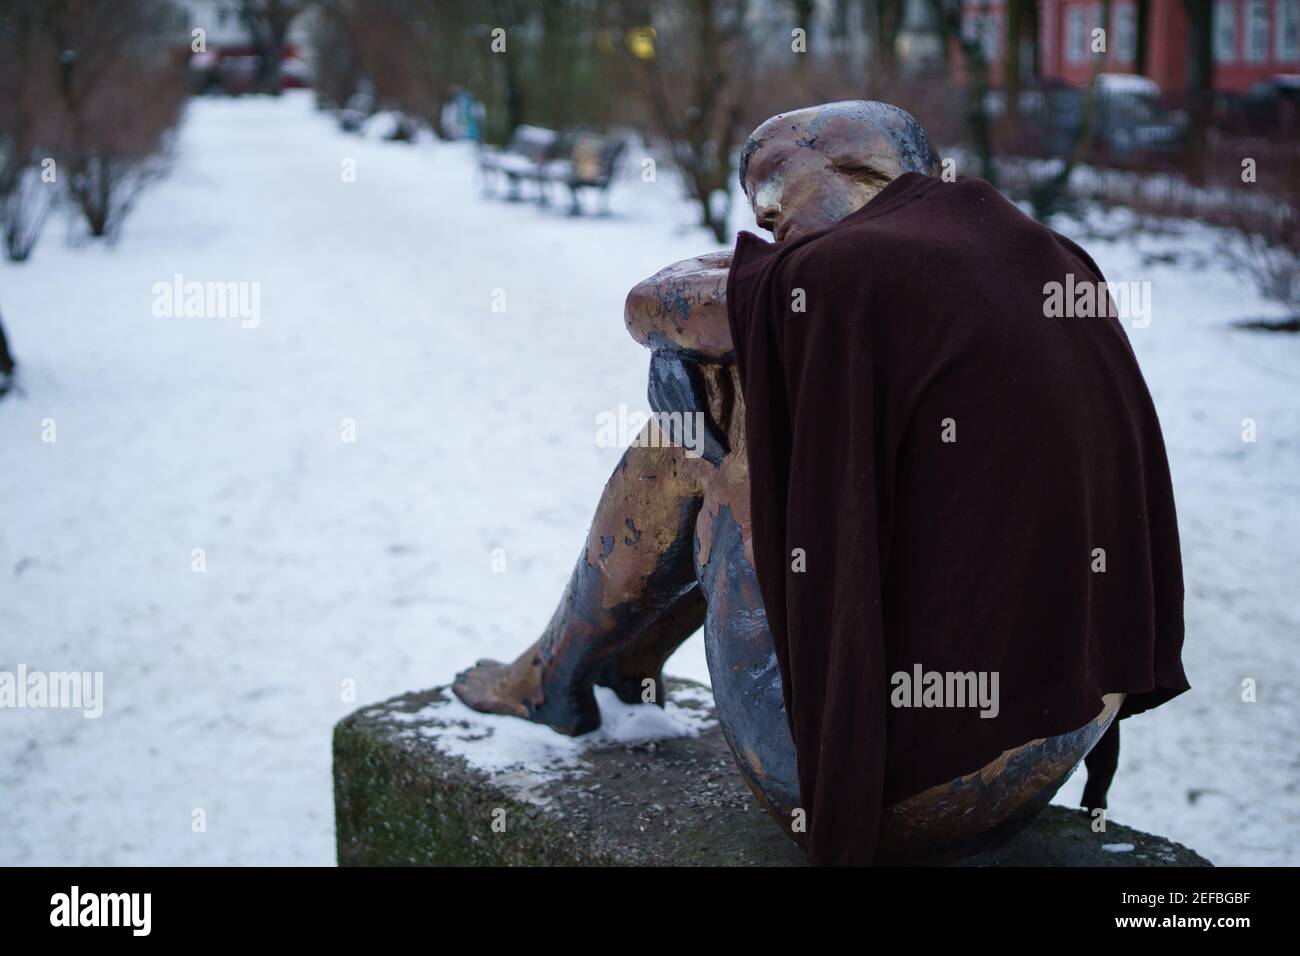 Warm gestures in a cold city Stock Photo